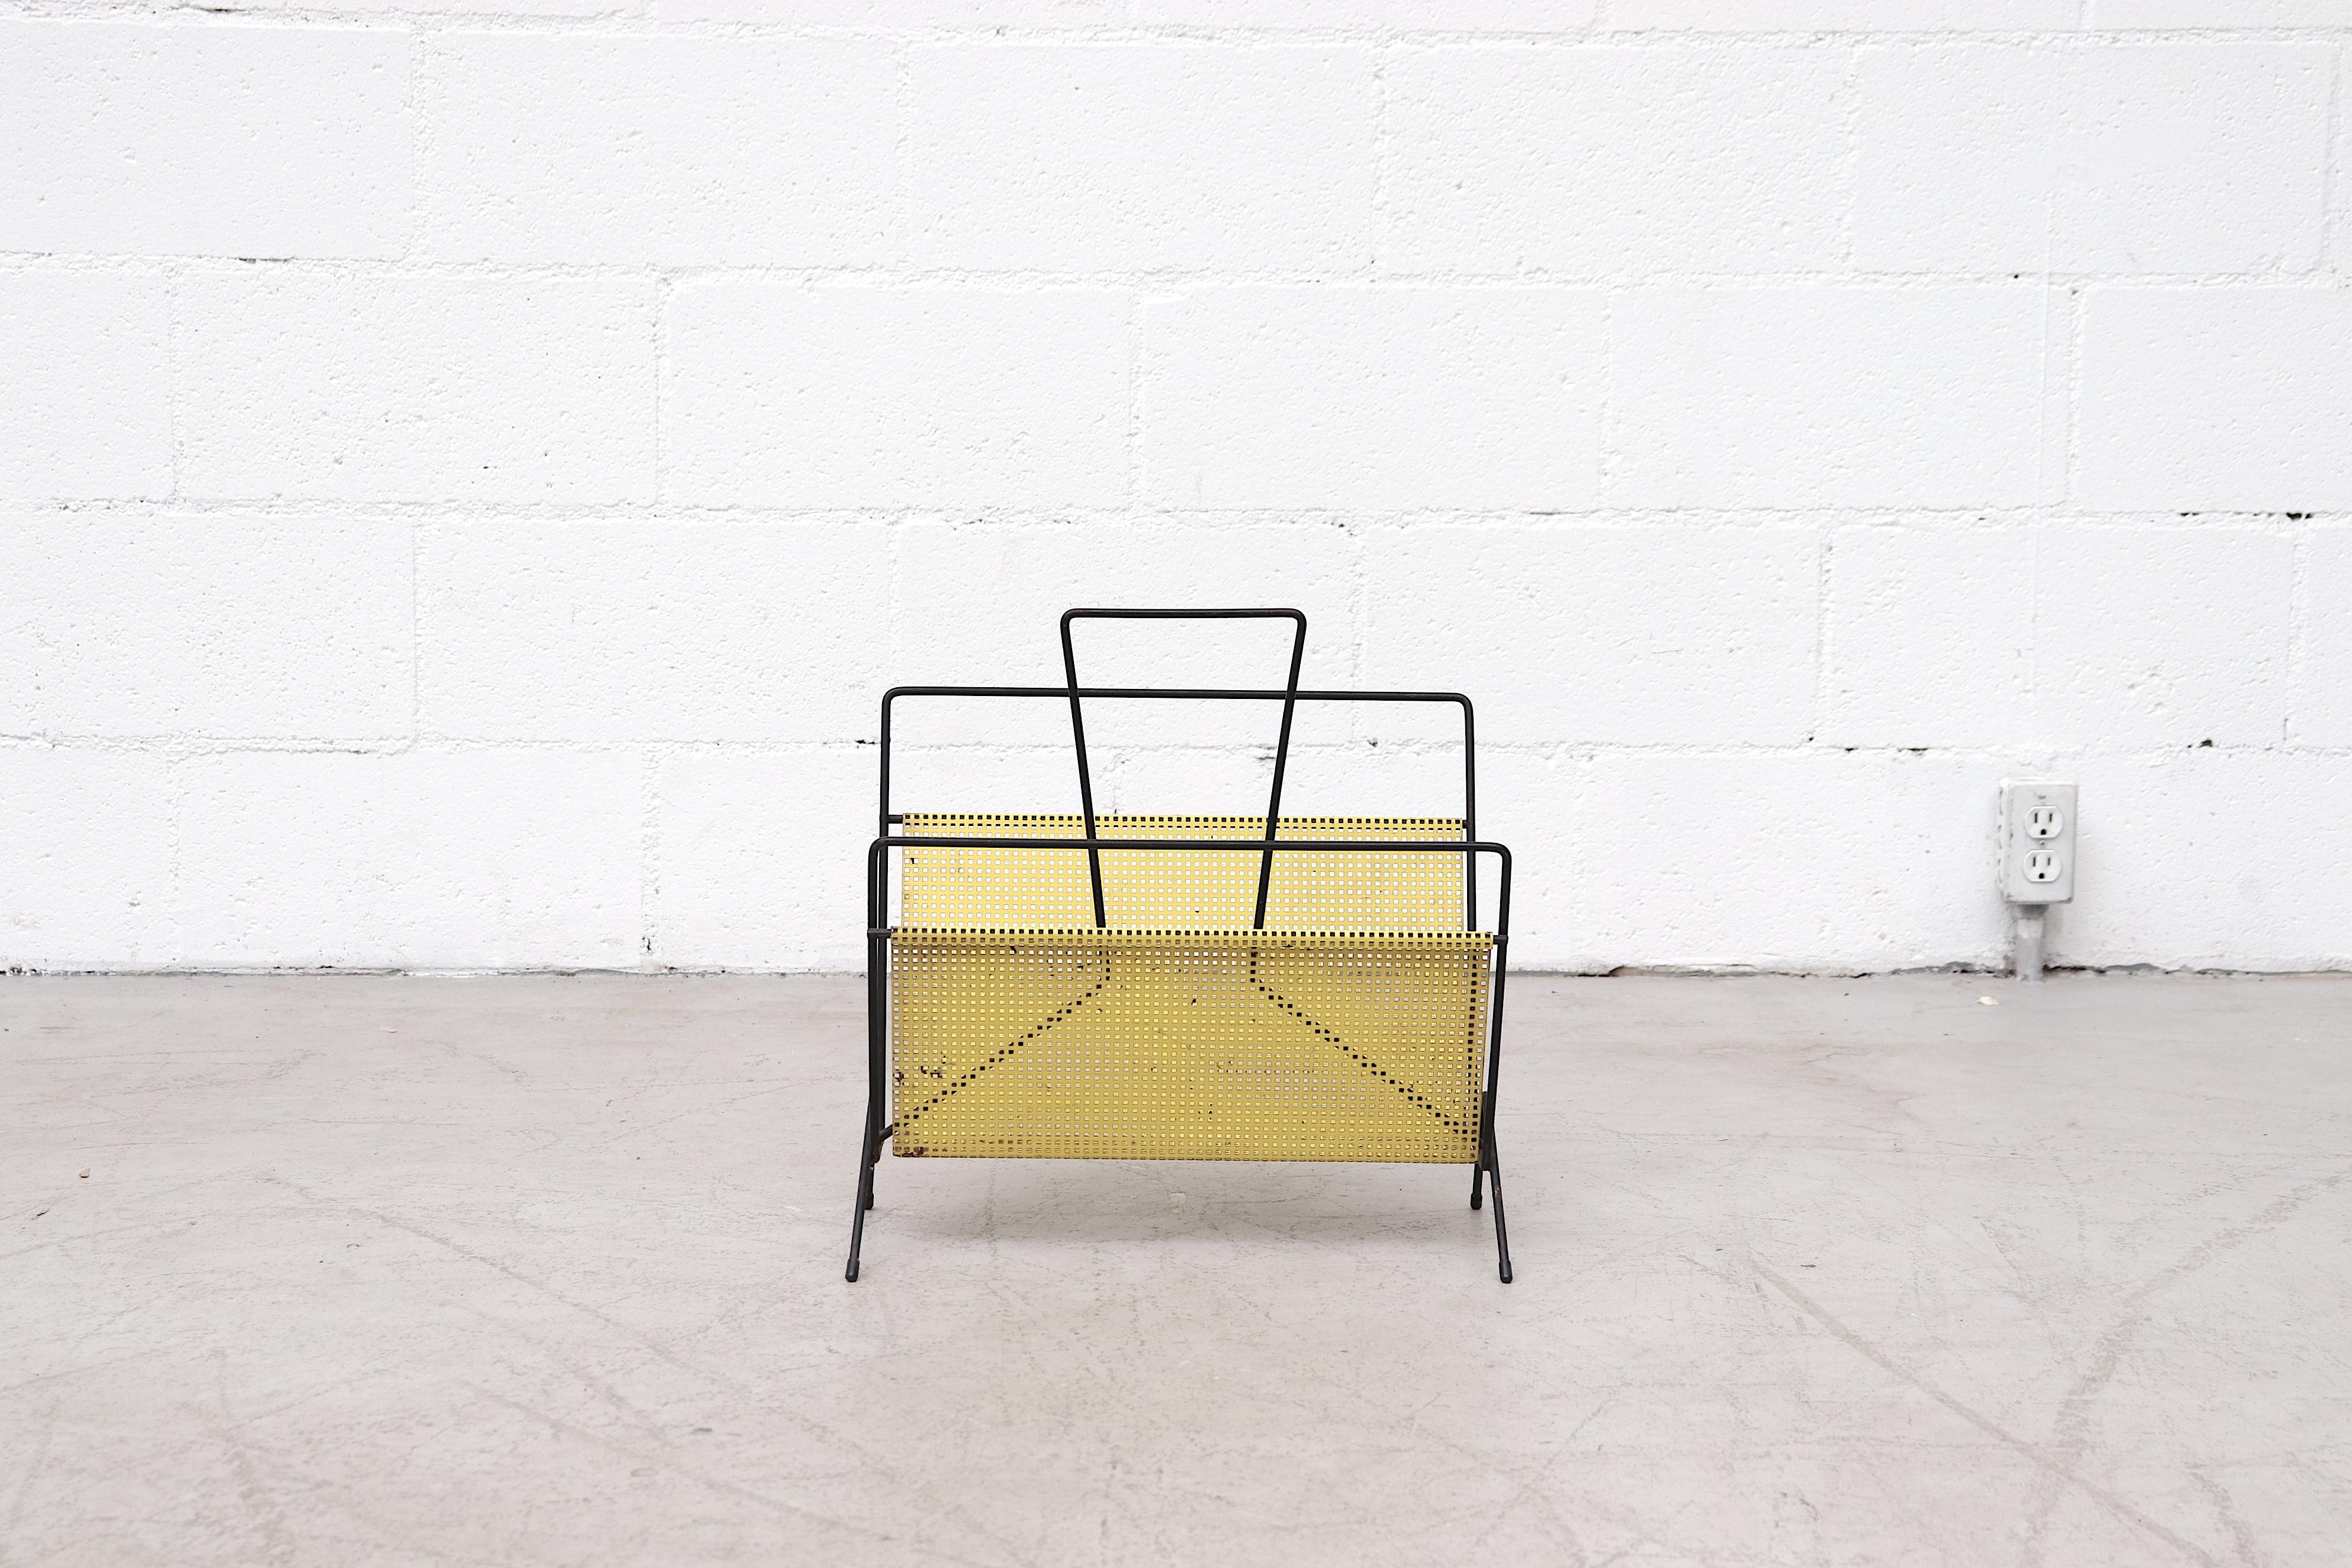 Midcentury Mategot style yellow perforated metal magazine rack with black enameled wire frame. In original condition with some visible wear and mild rust.